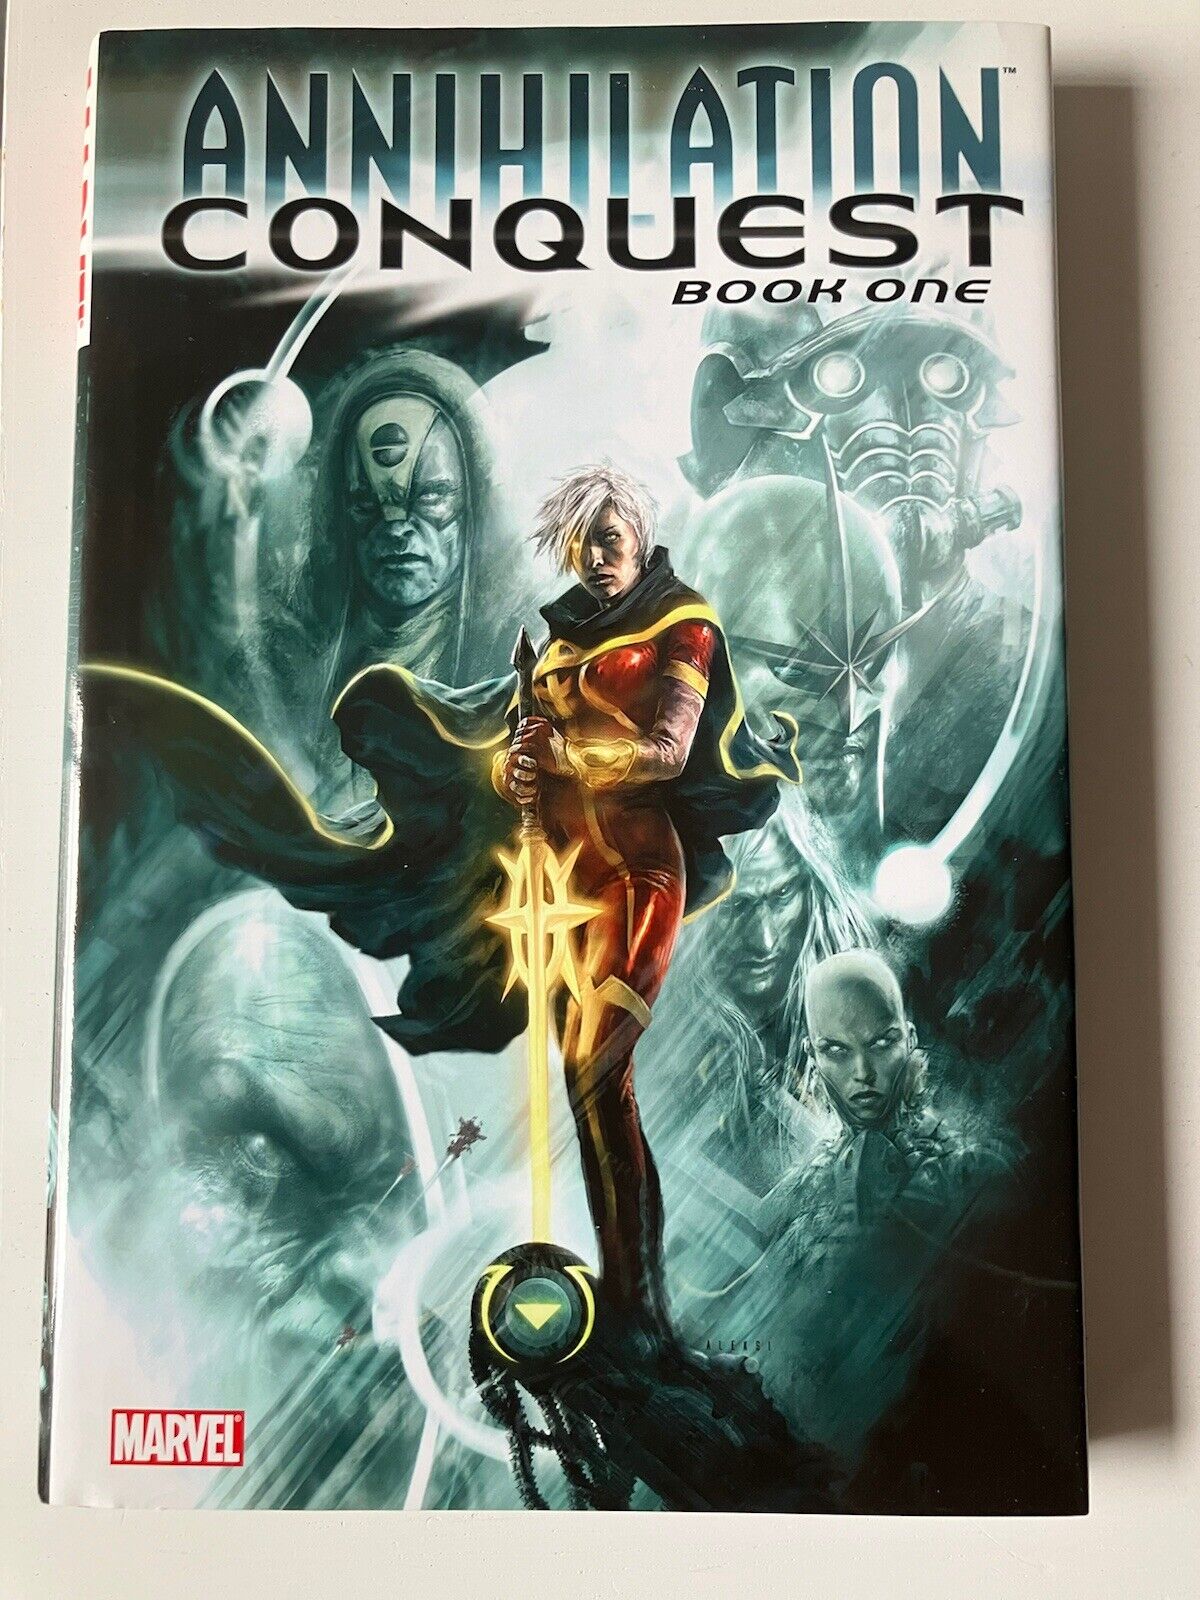 ANNIHILATION CONQUEST BOOK ONE DELUXE OVERSIZED HARDCOVER (MARVEL COMICS)